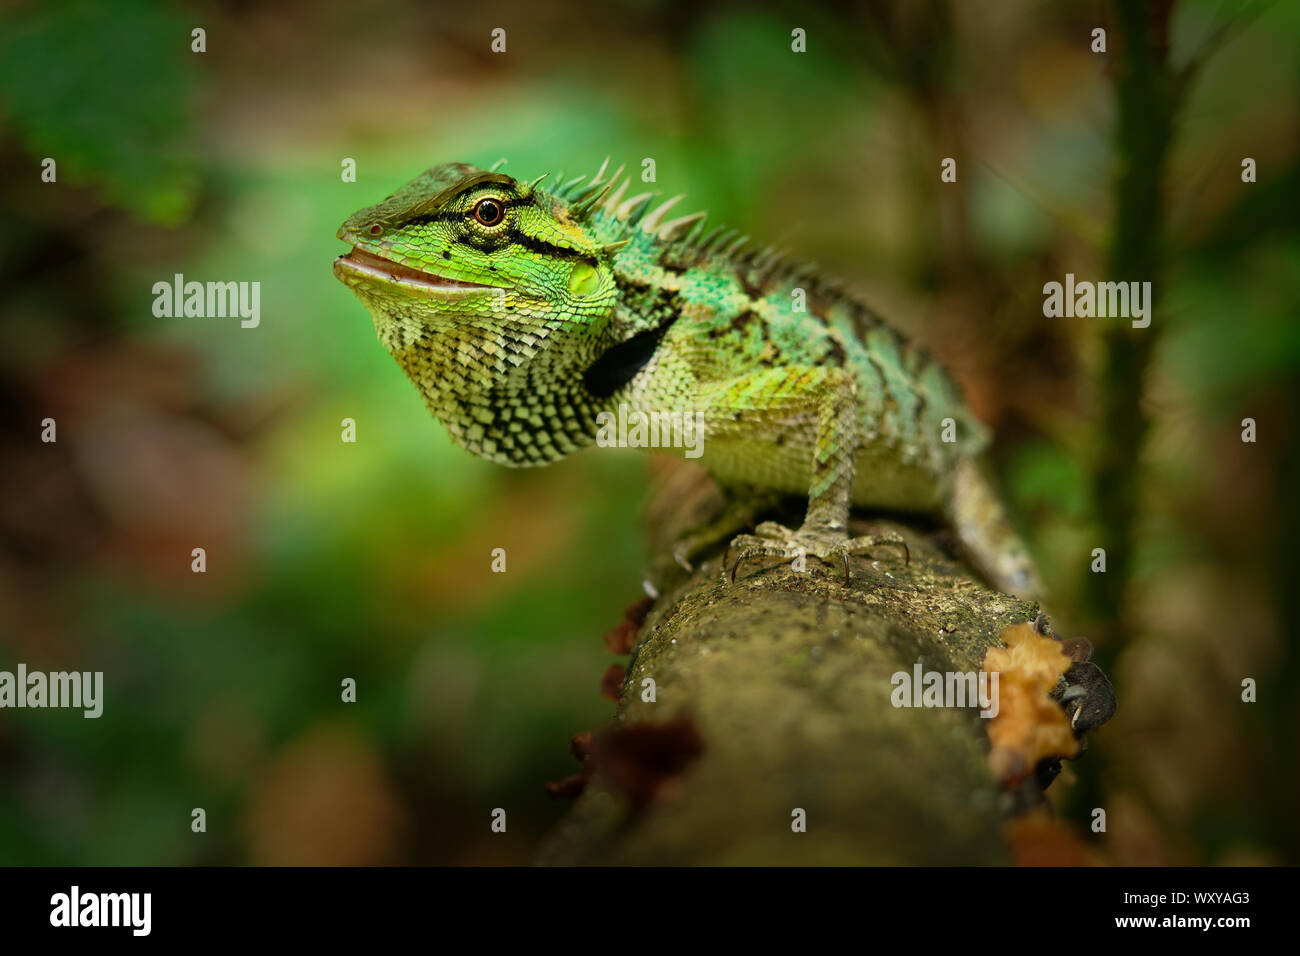 Emma Grays forest lizard - Calotes emma species of lizard in the family Agamidae. The species is endemic to China, South Asia, and Southeast Asia, Tha Stock Photo